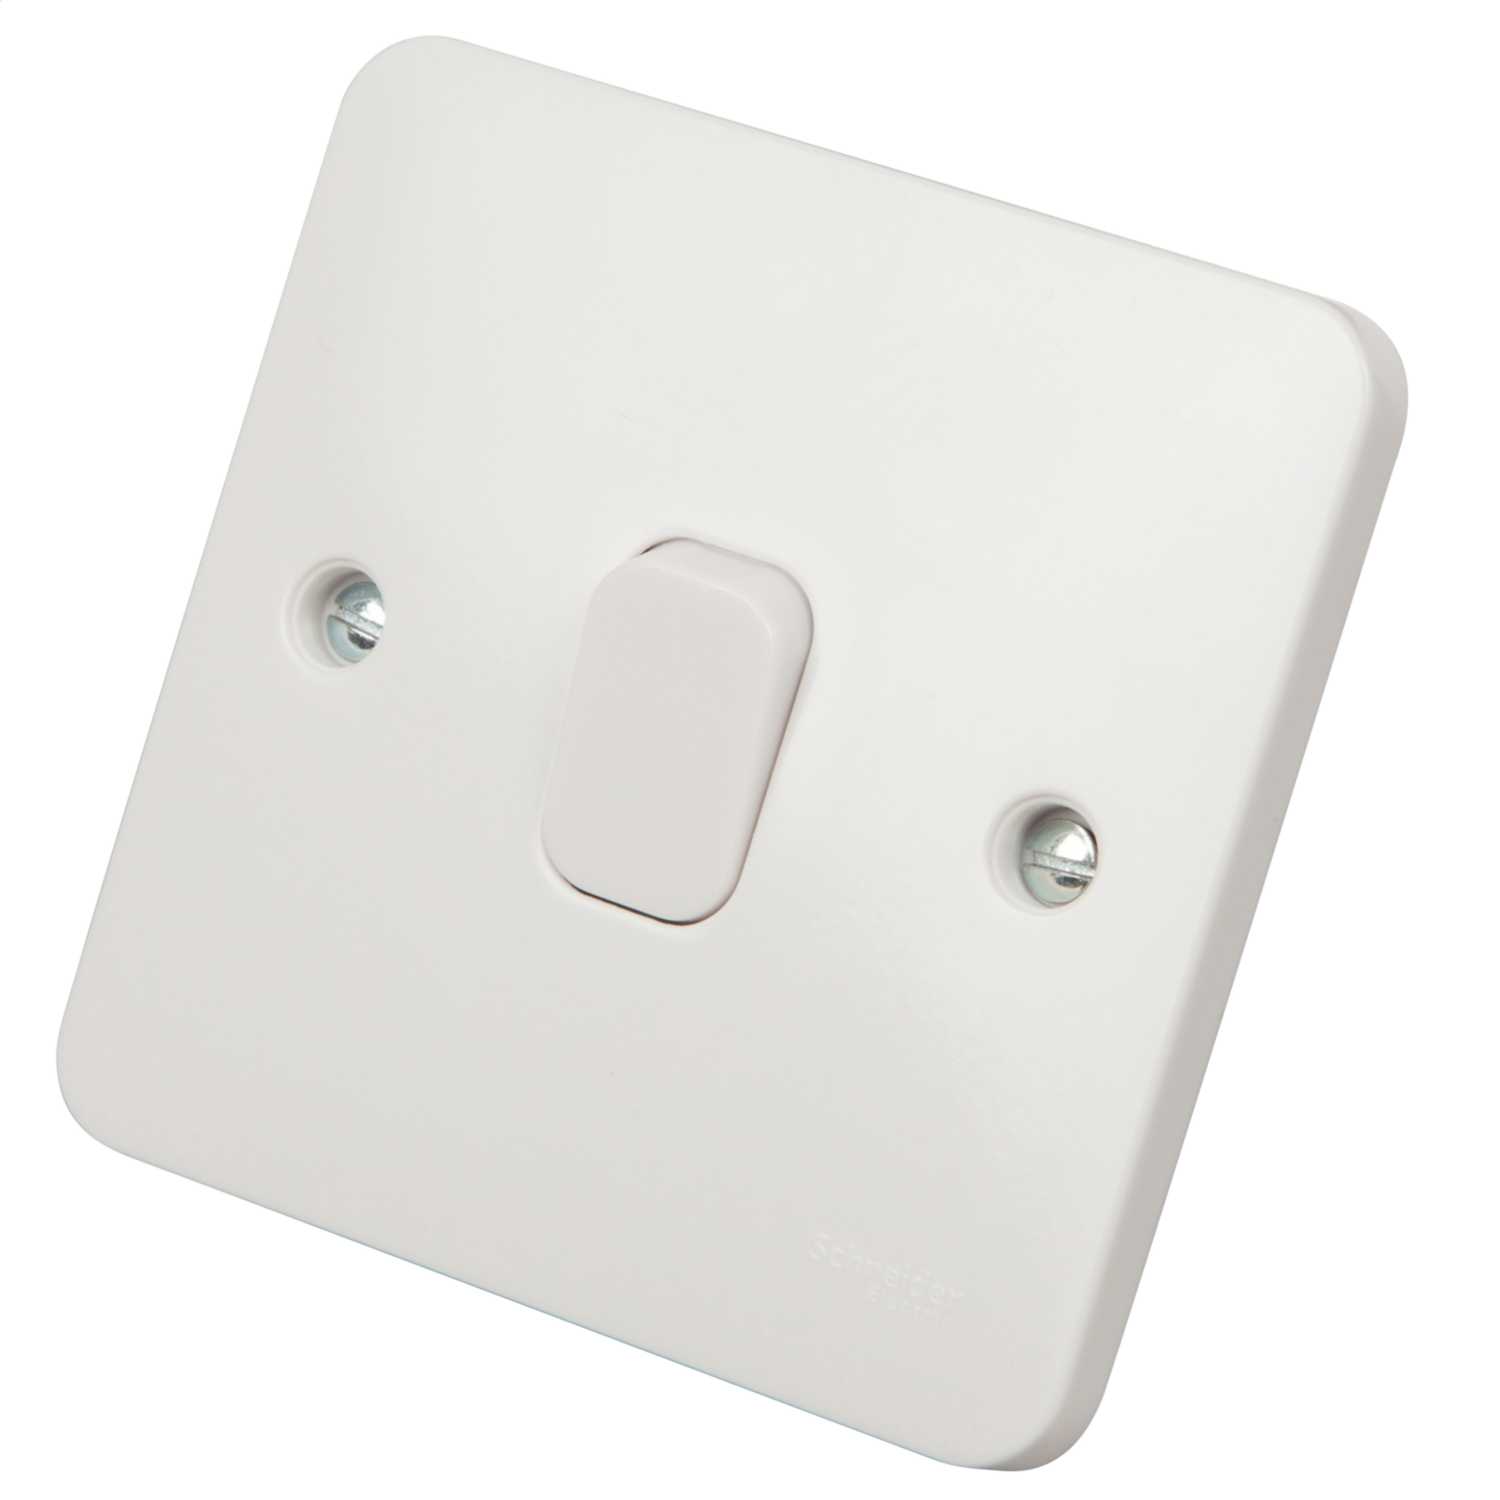 GGBL1014 White Moulded 1 Gang Intermediate Switch SCHNEIDER Lisse